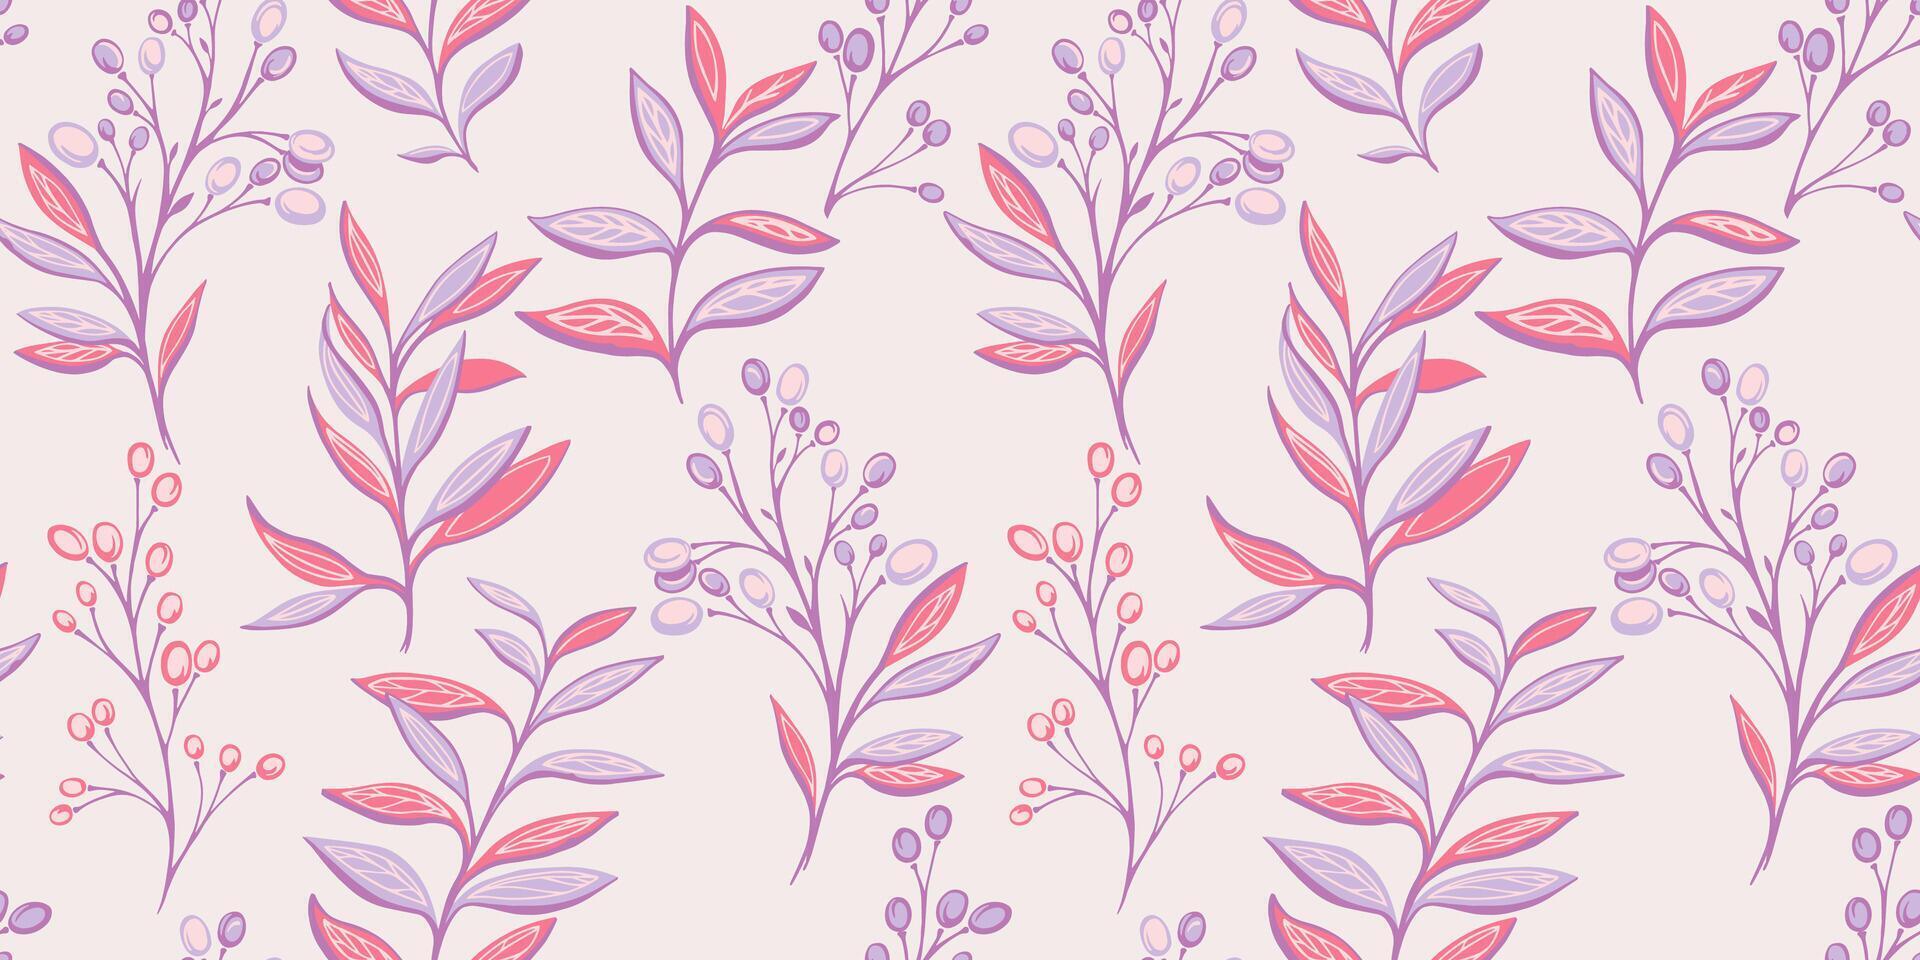 Pastel gently seamless pattern with abstract leaves, branches with shapes berries, drops, spots, dots. Vector hand drawn sketch. Creative botanical printing. Collage for designs, patterned, fabric